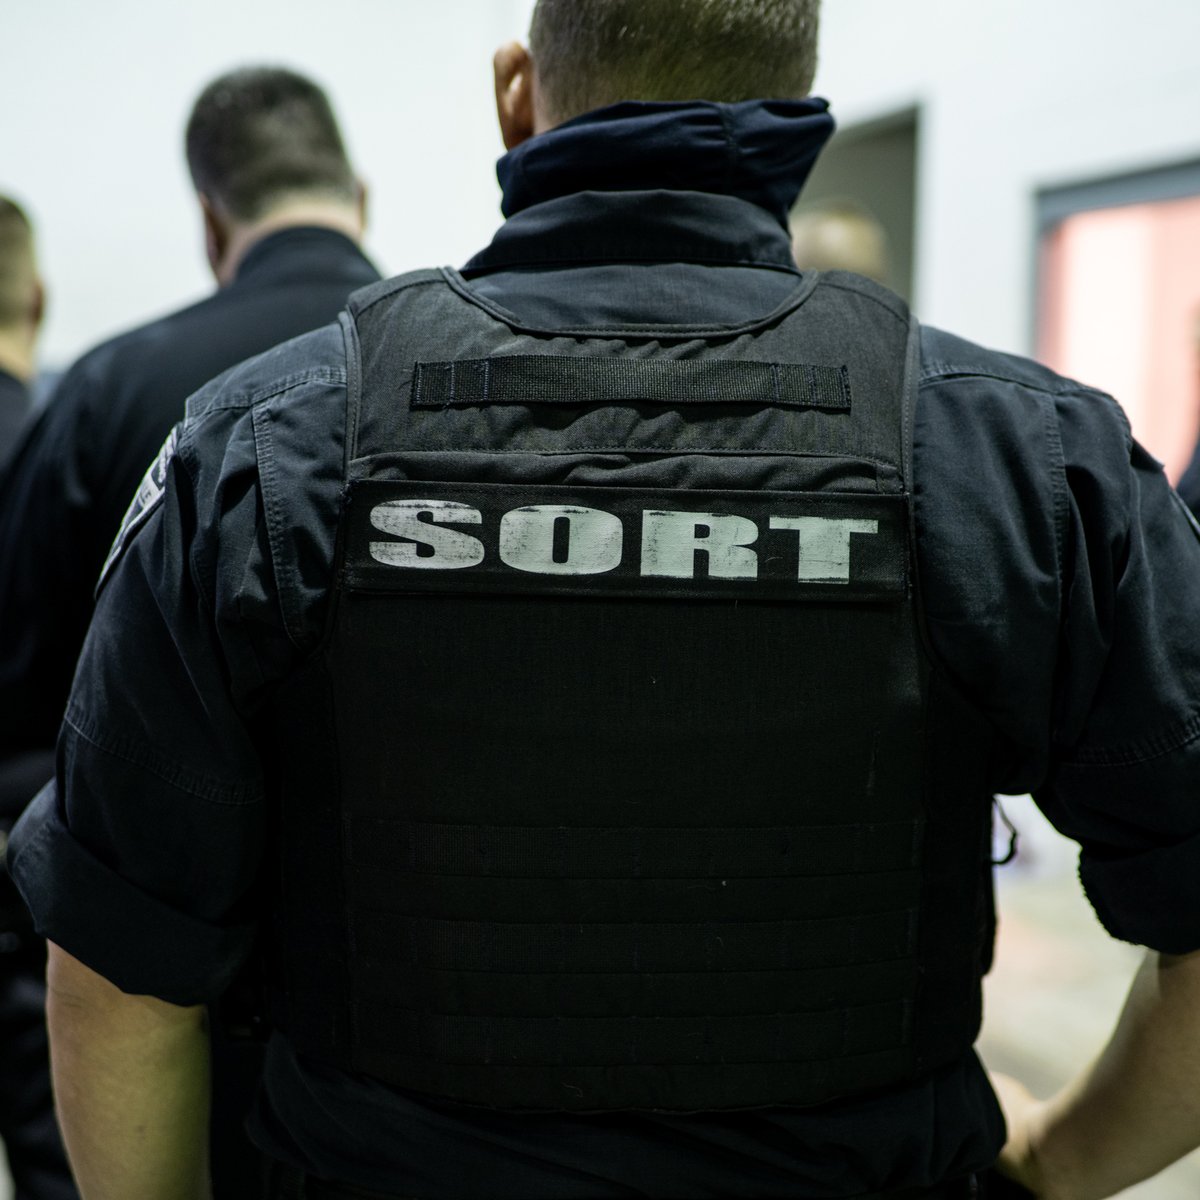 Trained for high-risk situations, our SORT team is always ready to serve and protect!

#CareerInCorrections #SORT #CorrectionalFacility #CorrectionsCareer #Corrections #SafetyInitiatives